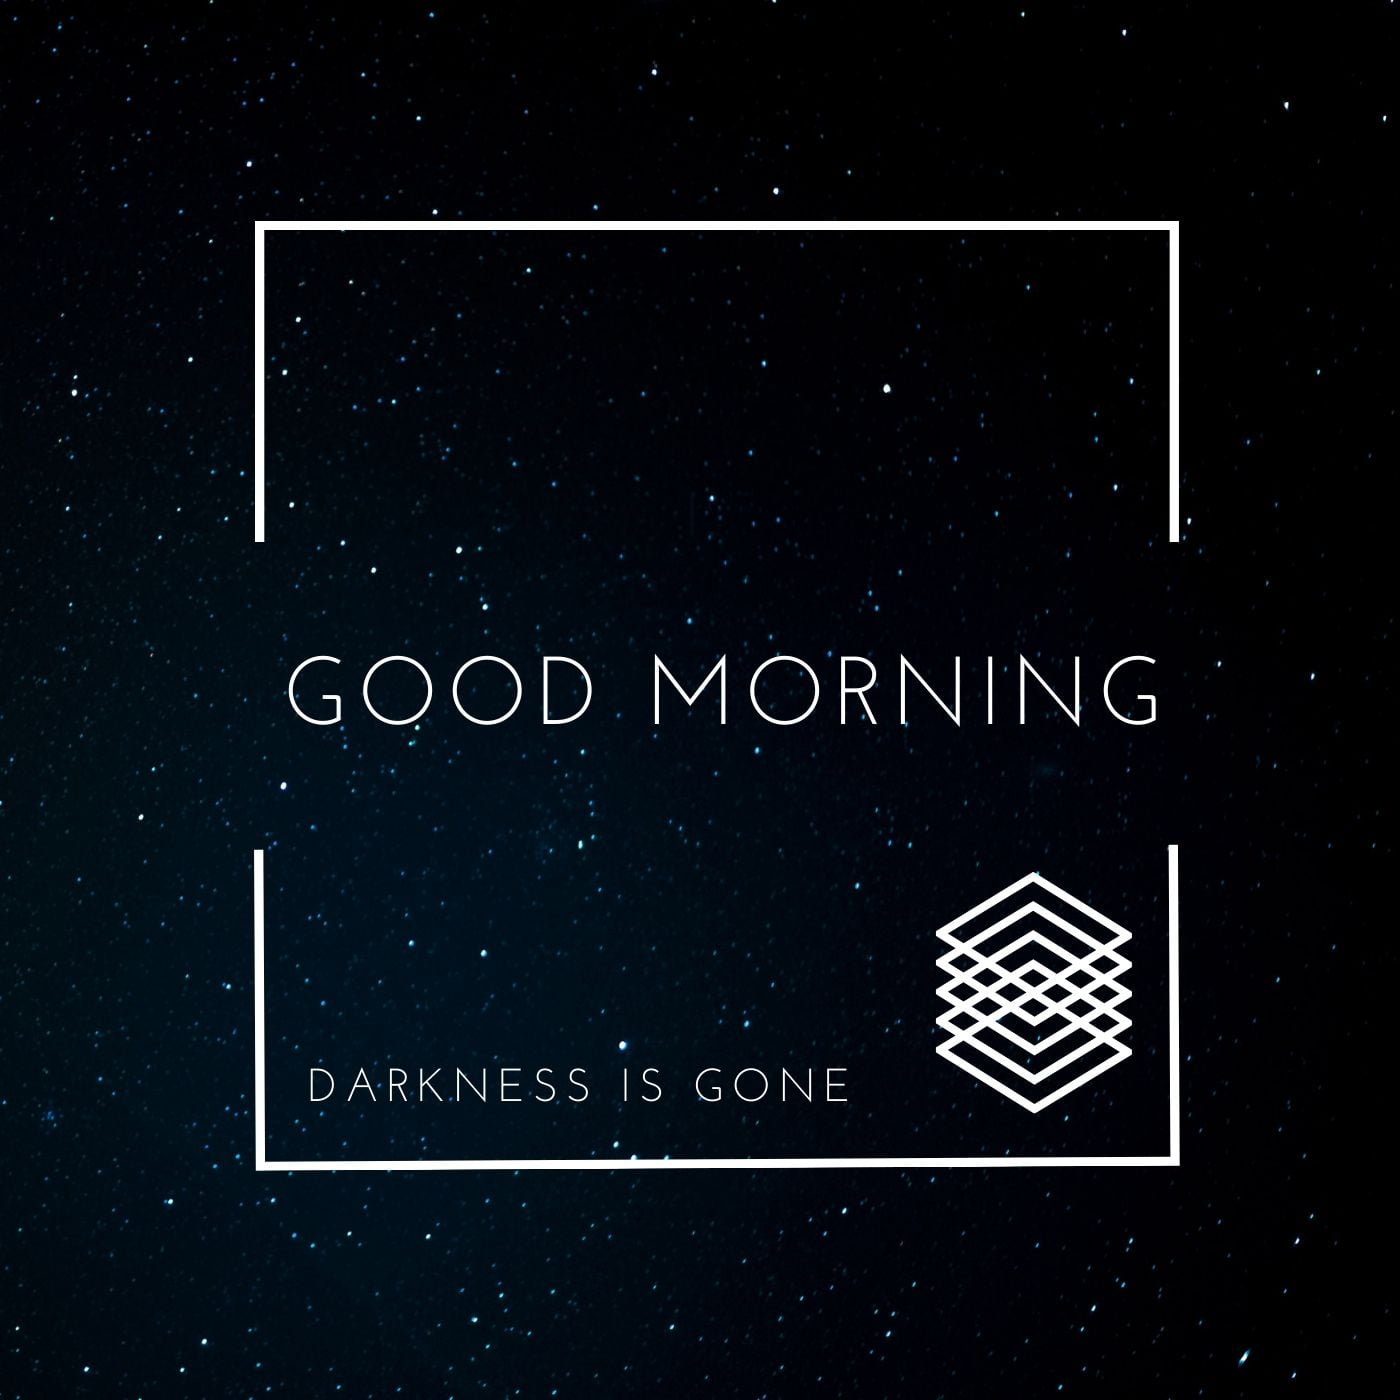 Good Morning Darkness Is Gone Image